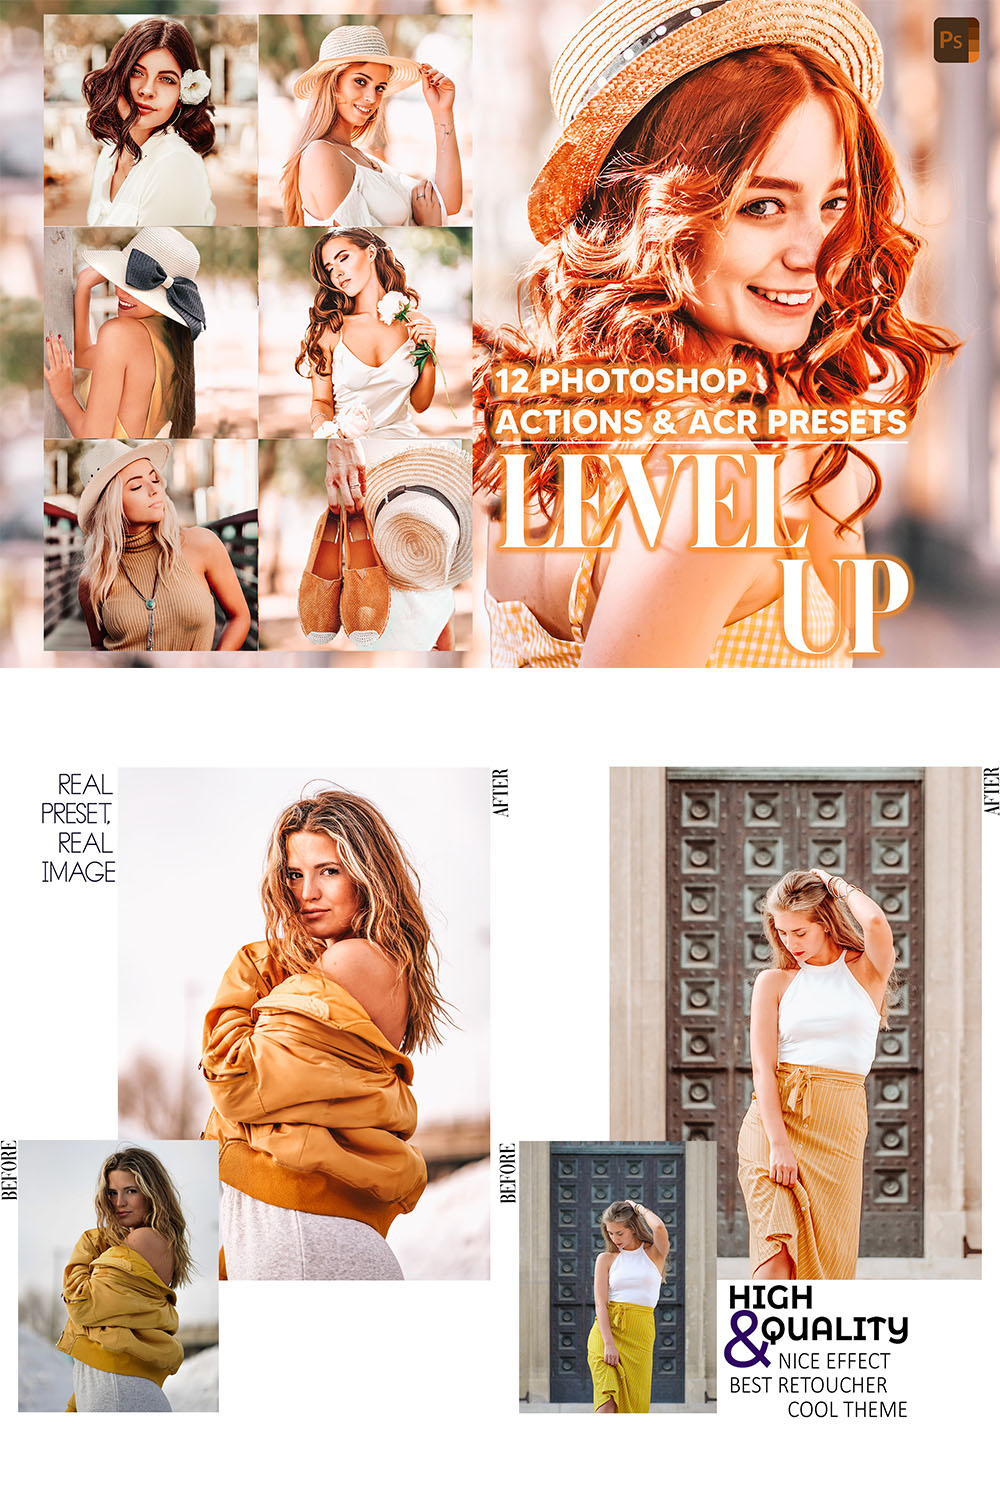 12 Photoshop Actions, Level Up Ps Action, Spring Warm ACR Preset, Woman Bright Ps Filter, Atn Portrait Lifestyle Theme Instagram, Blogger pinterest preview image.